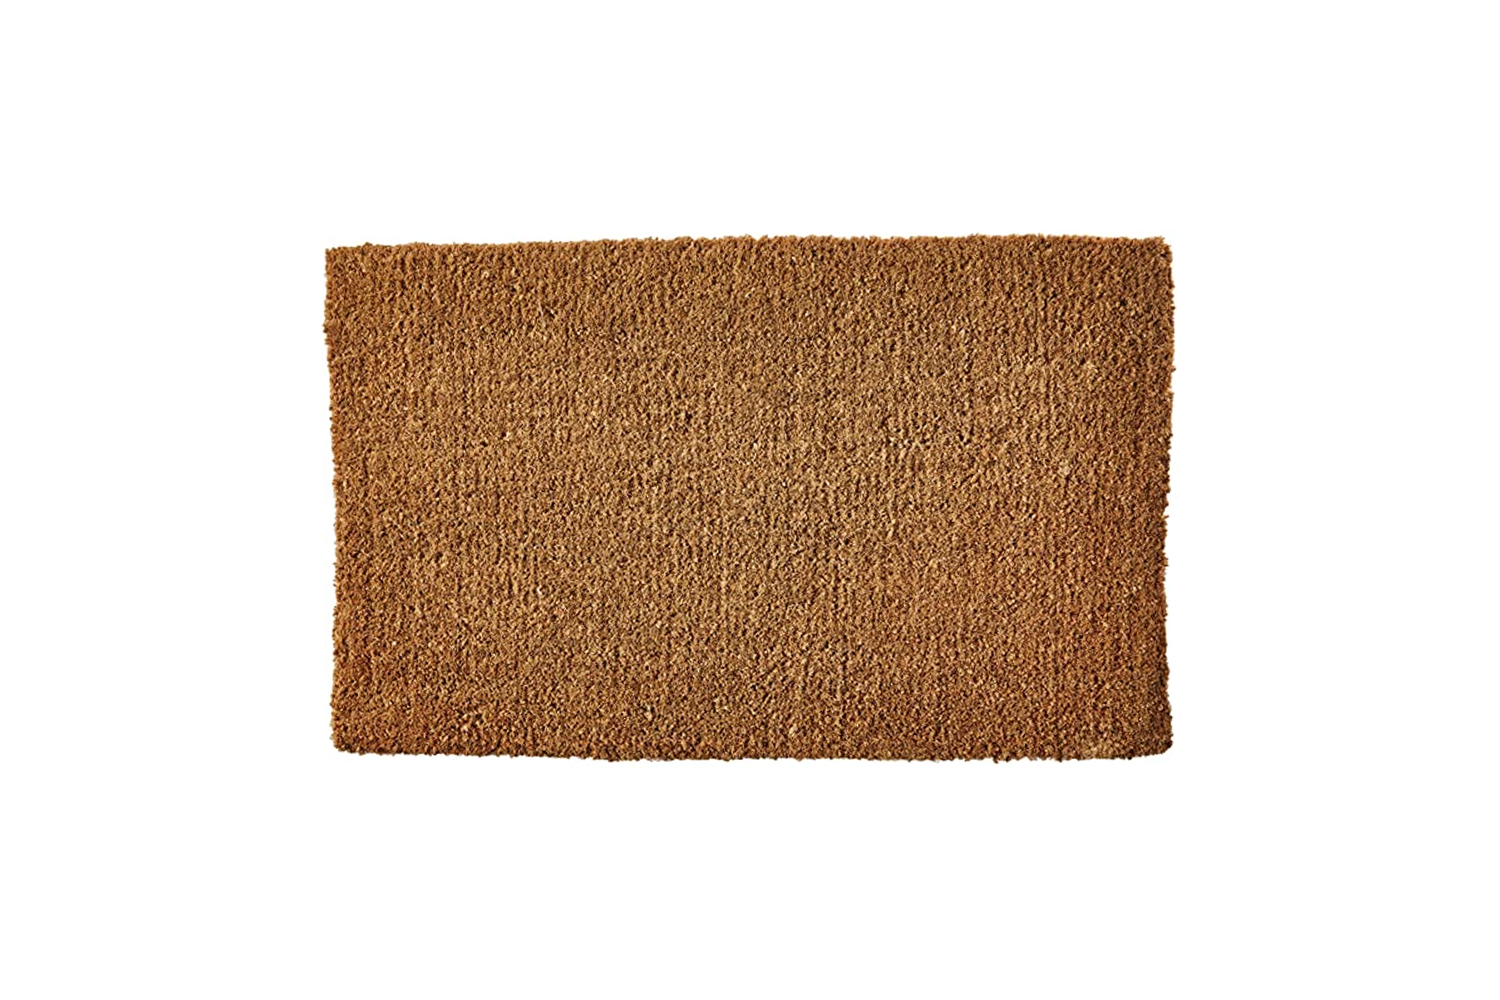 the coco coir door mat is inset into the kitchen floor and edged with metal tri 25